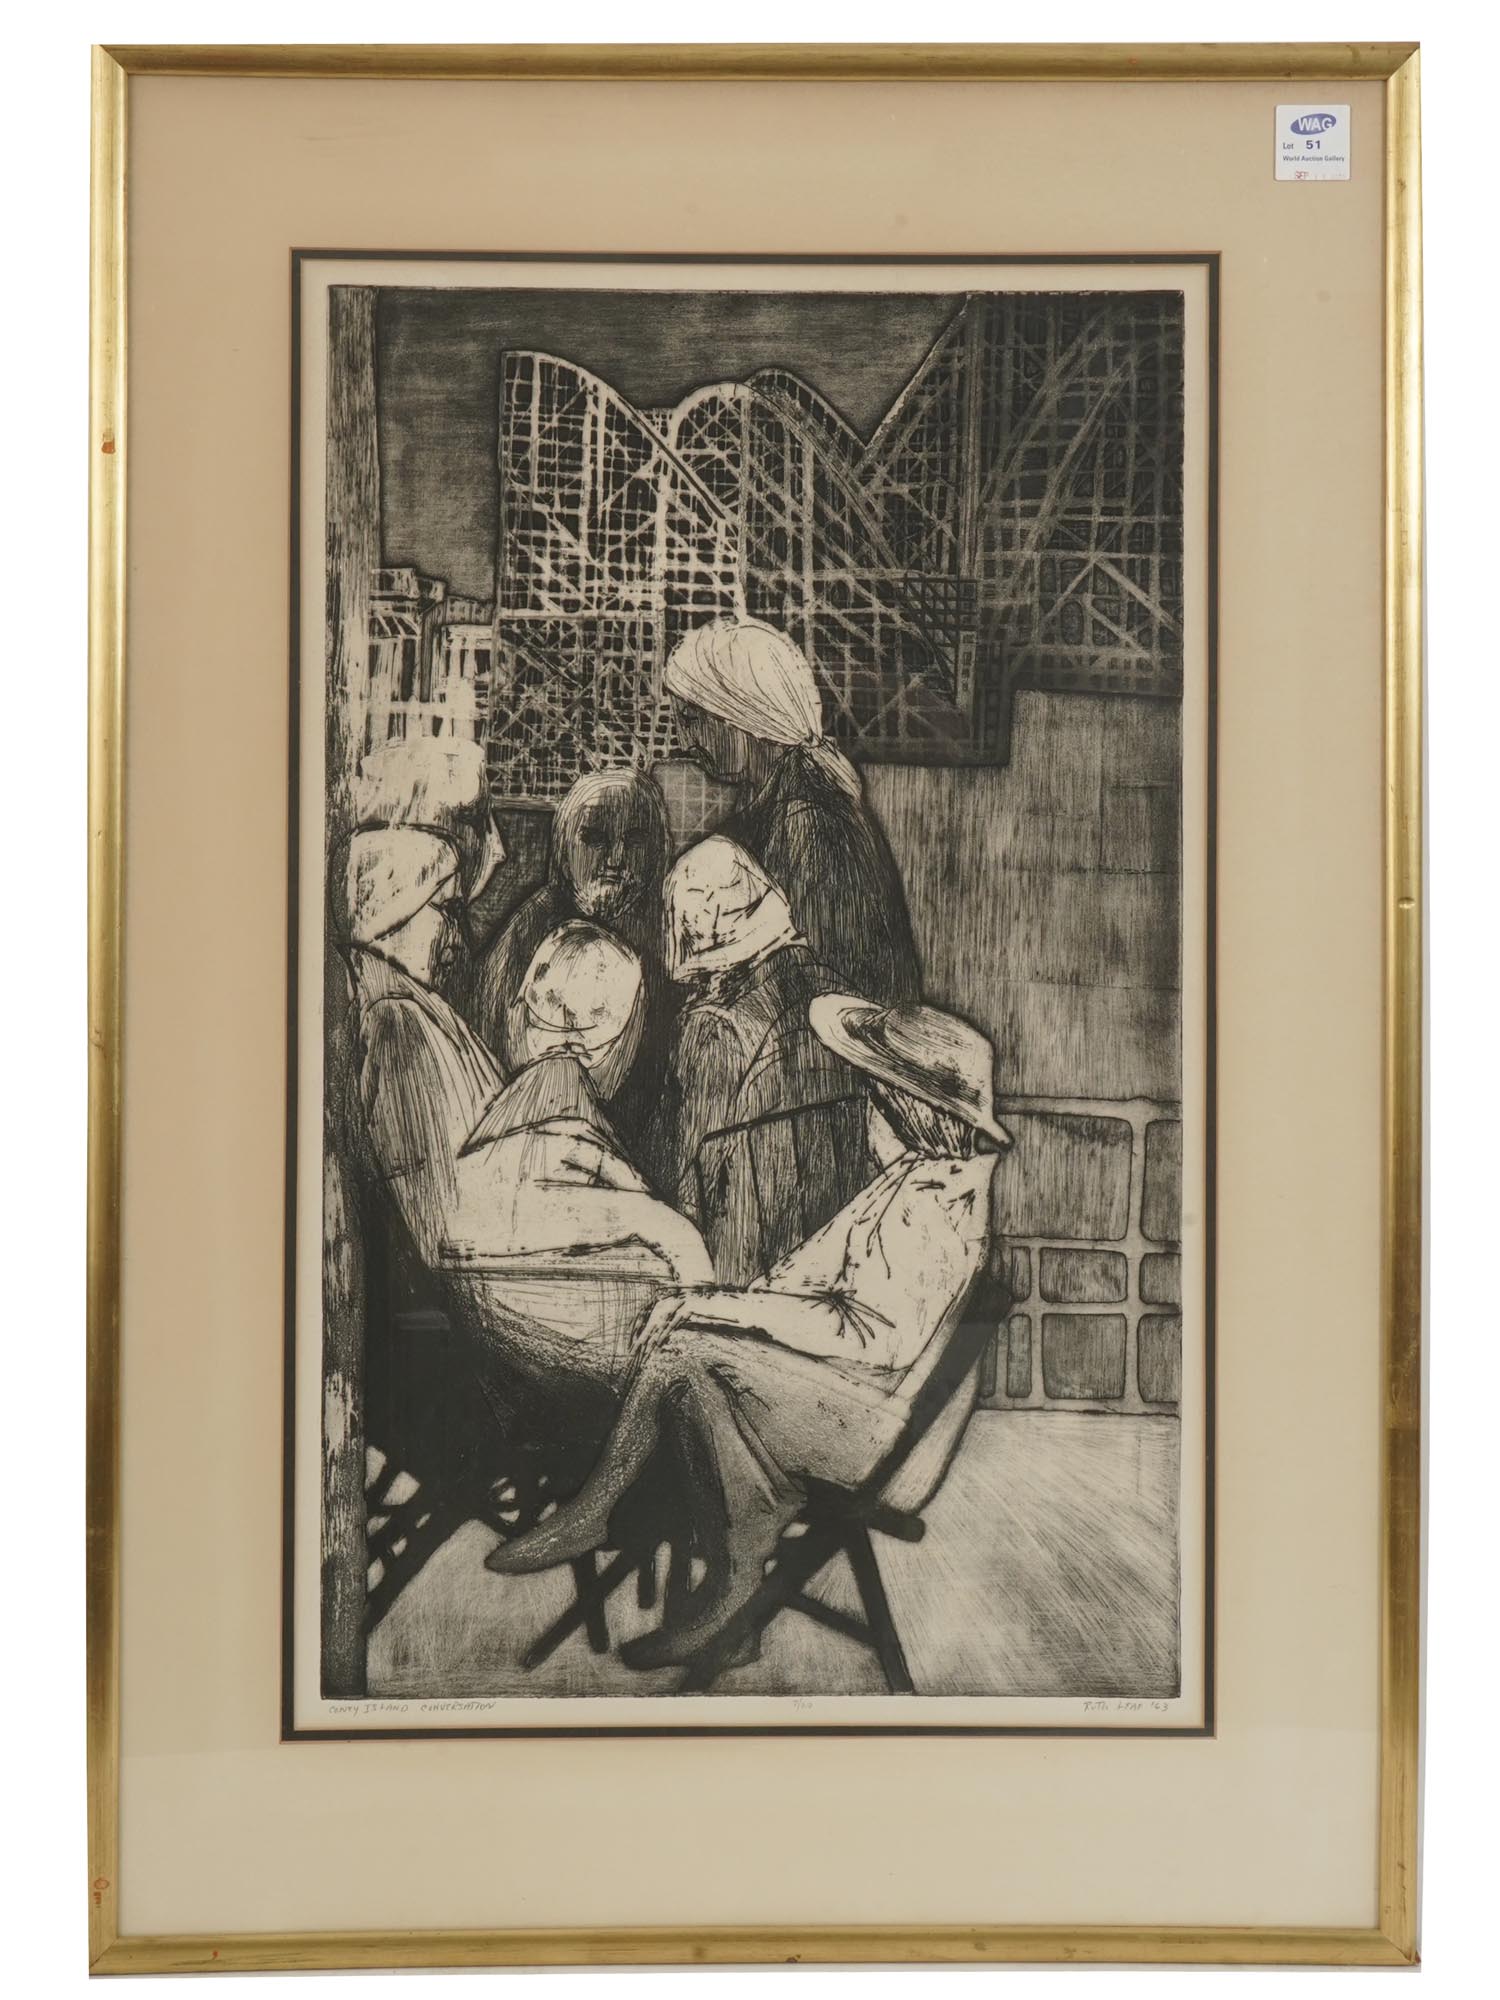 ETCHING CONEY ISLAND CONVERSATION BY RUTH LEAF PIC-0